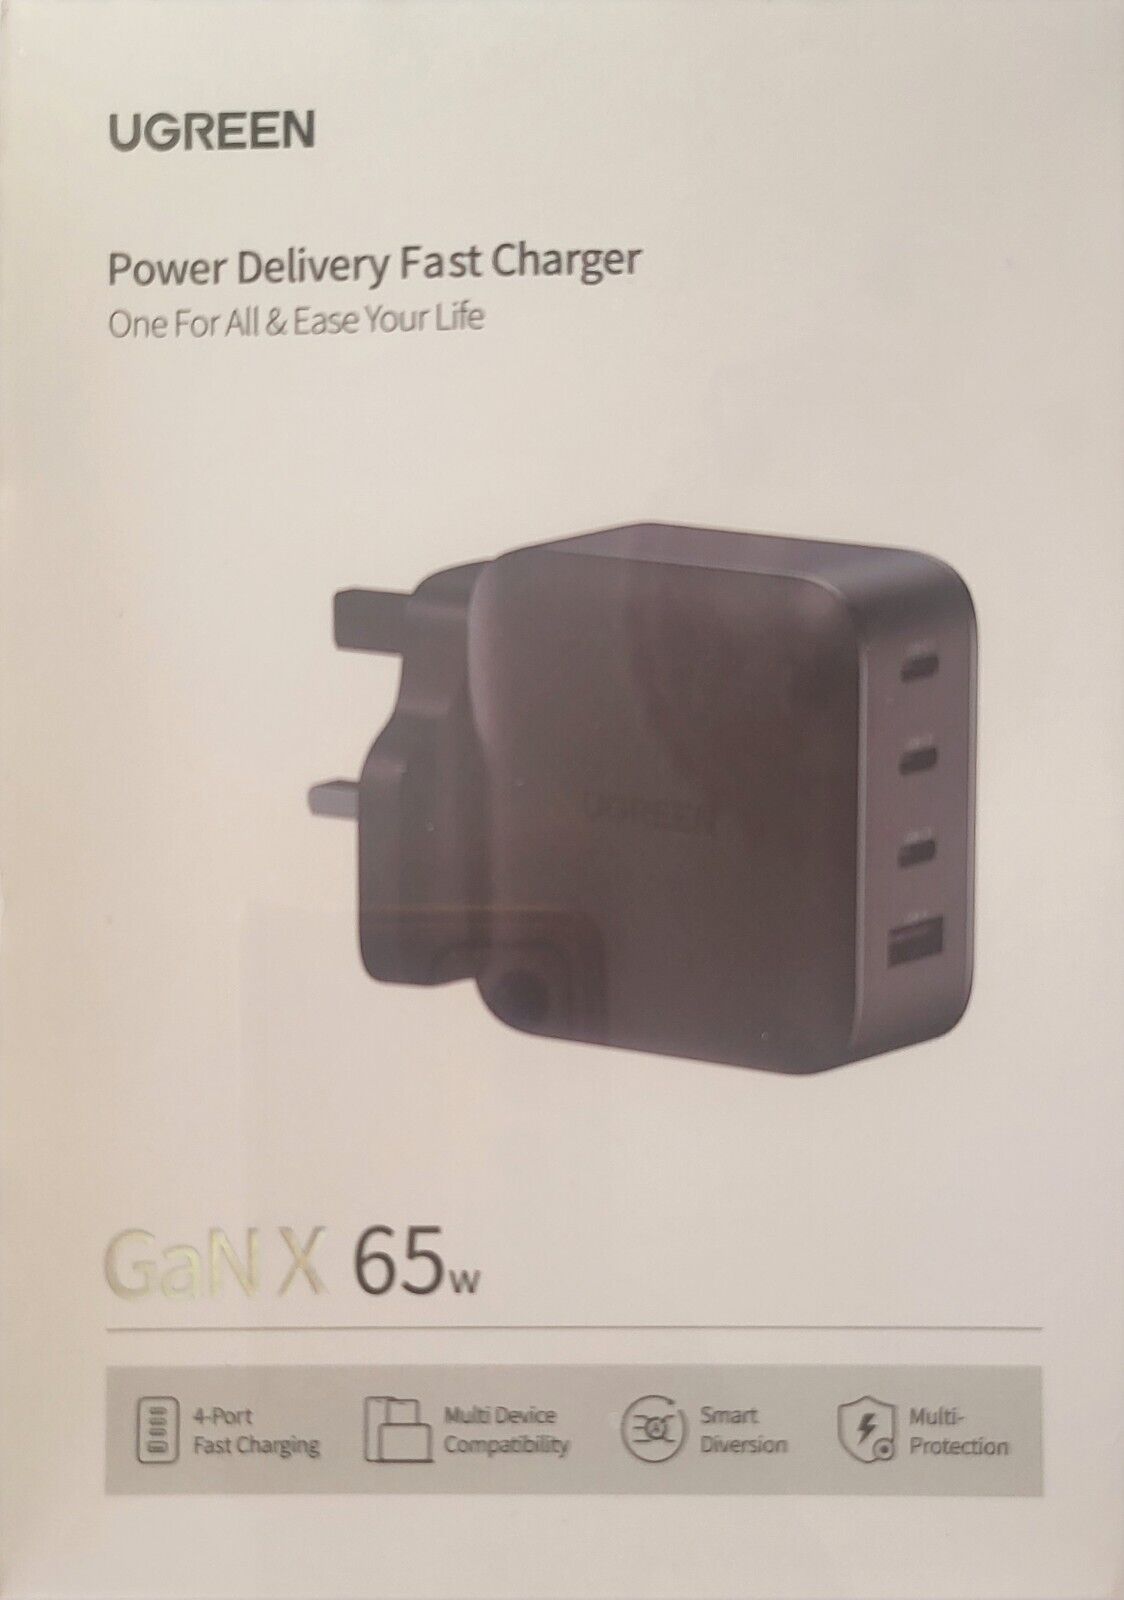 NEW UGREEN Power Delivery Multiport Fast Charger Plug One For All & Ease Your